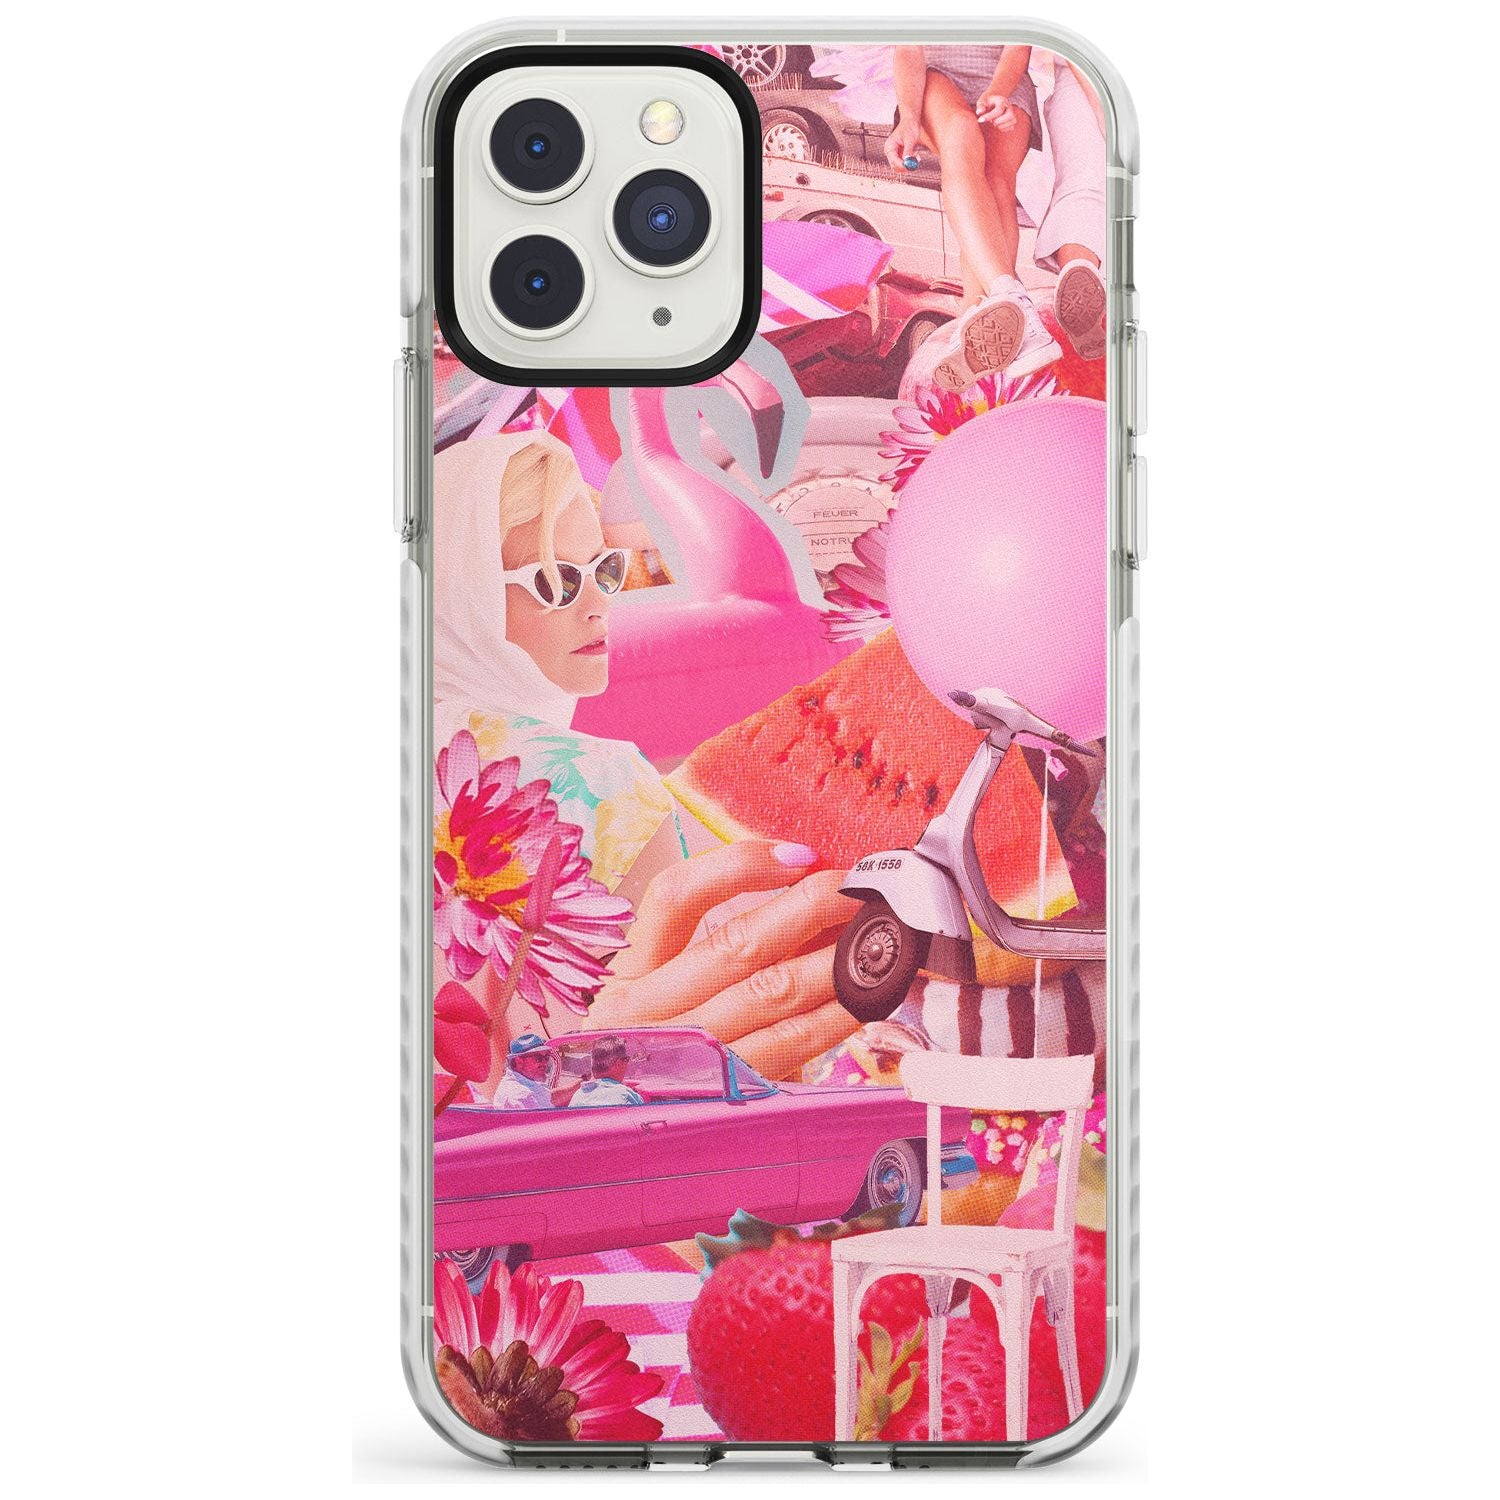 Vintage Collage: Pink Glamour Impact Phone Case for iPhone 11 Pro Max